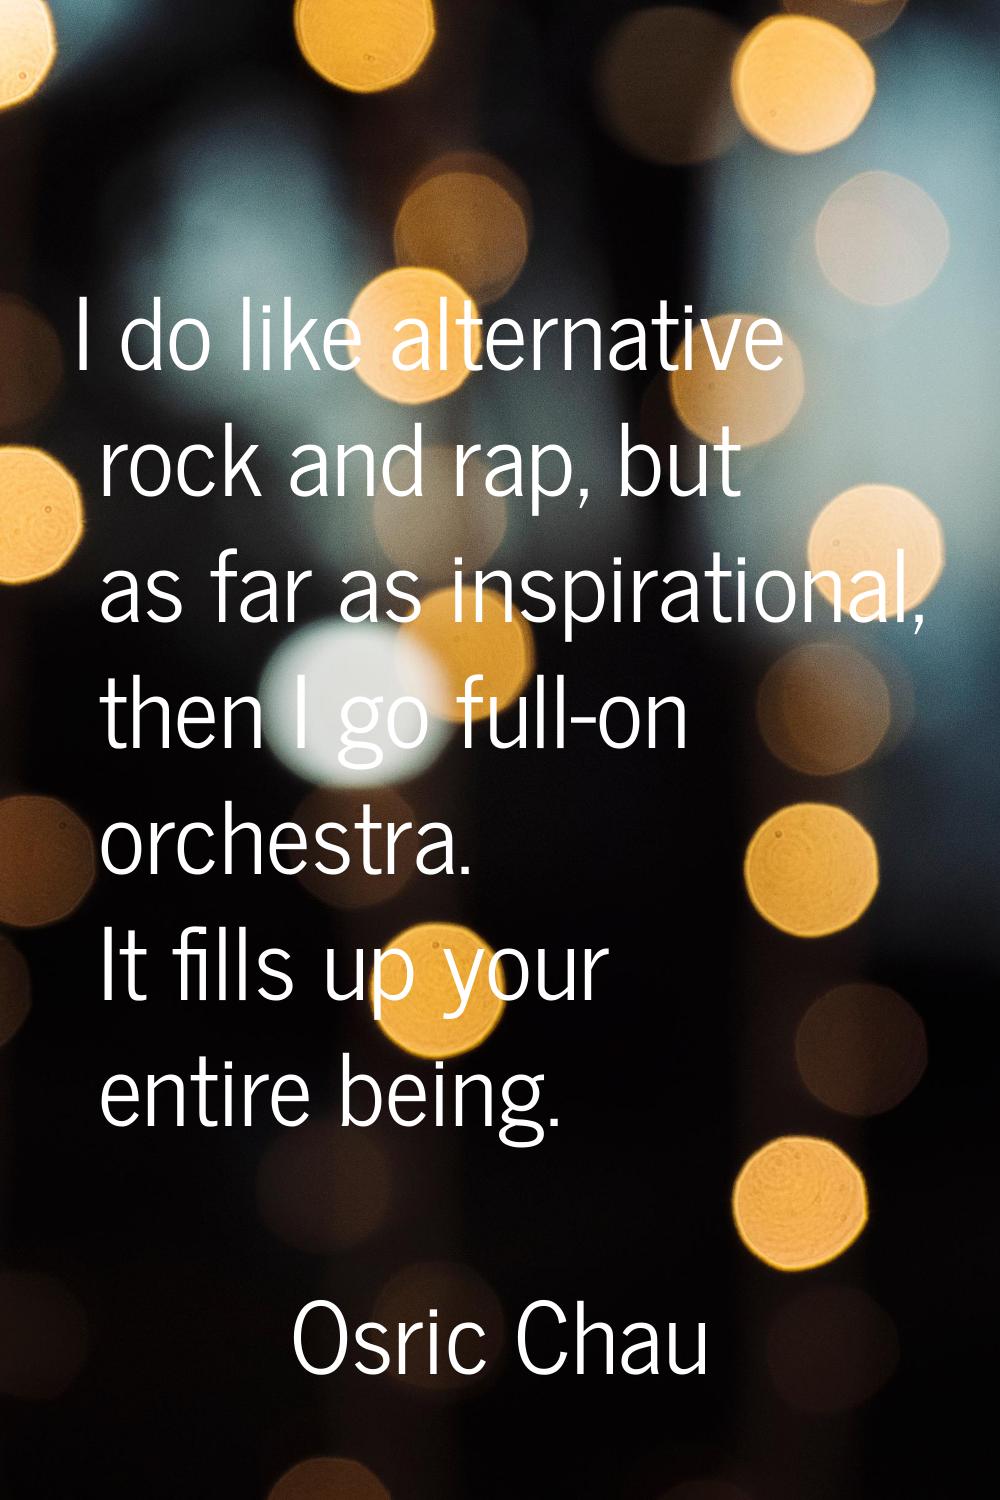 I do like alternative rock and rap, but as far as inspirational, then I go full-on orchestra. It fi